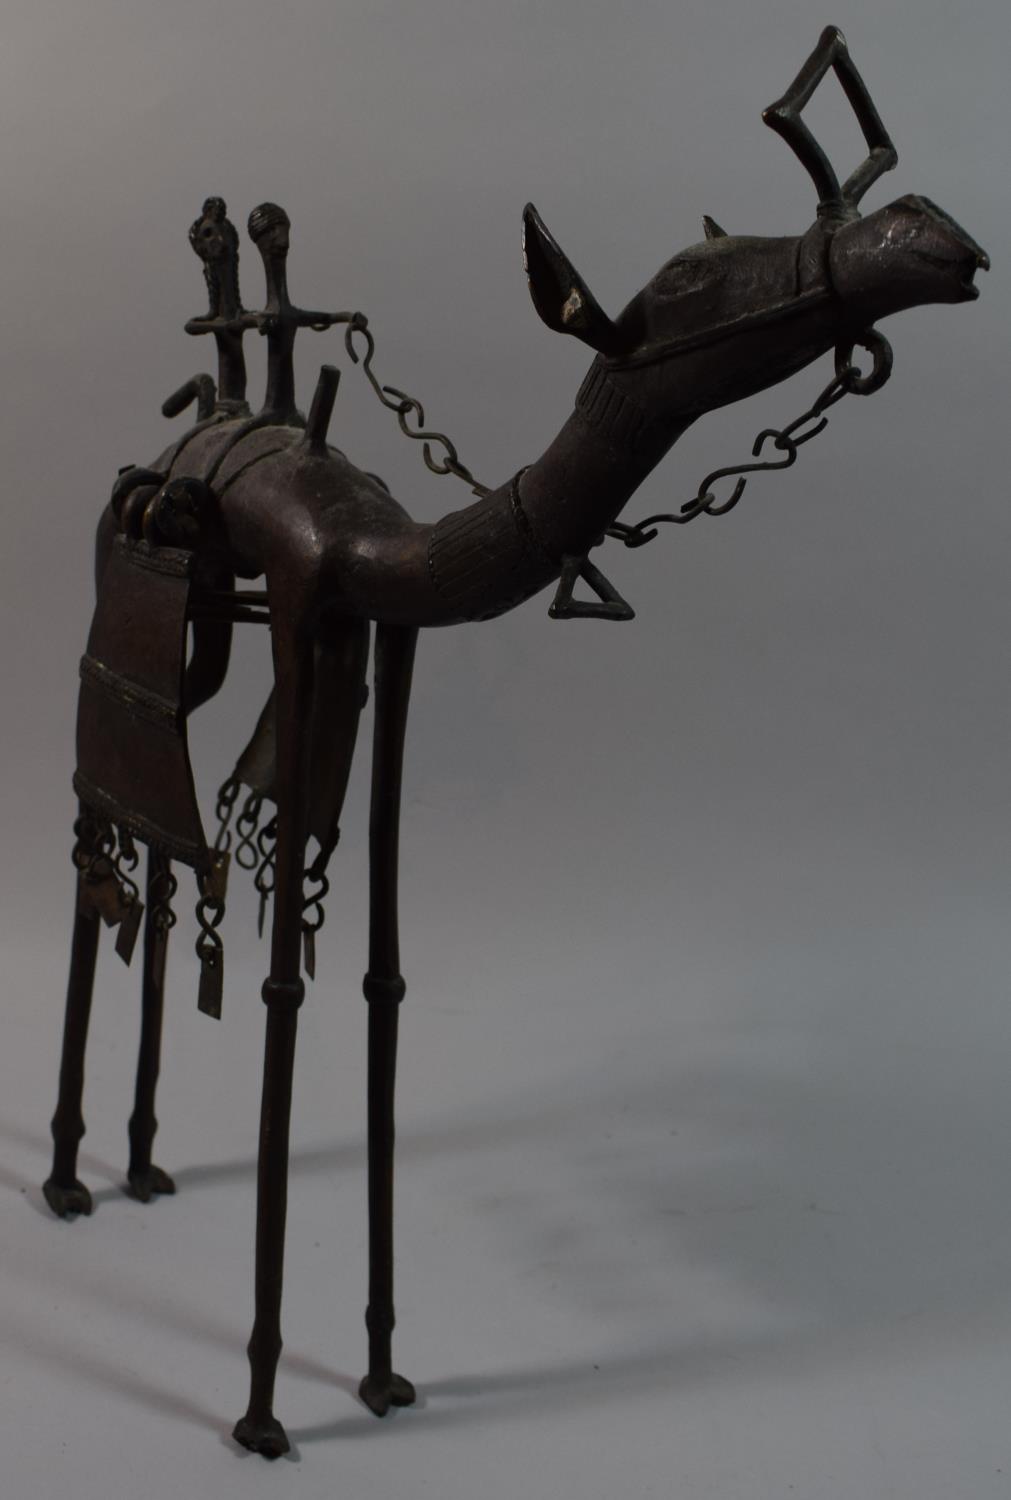 A Large Benim Bronze Figure of a Camel with Two Riders, 50cm High - Image 3 of 3